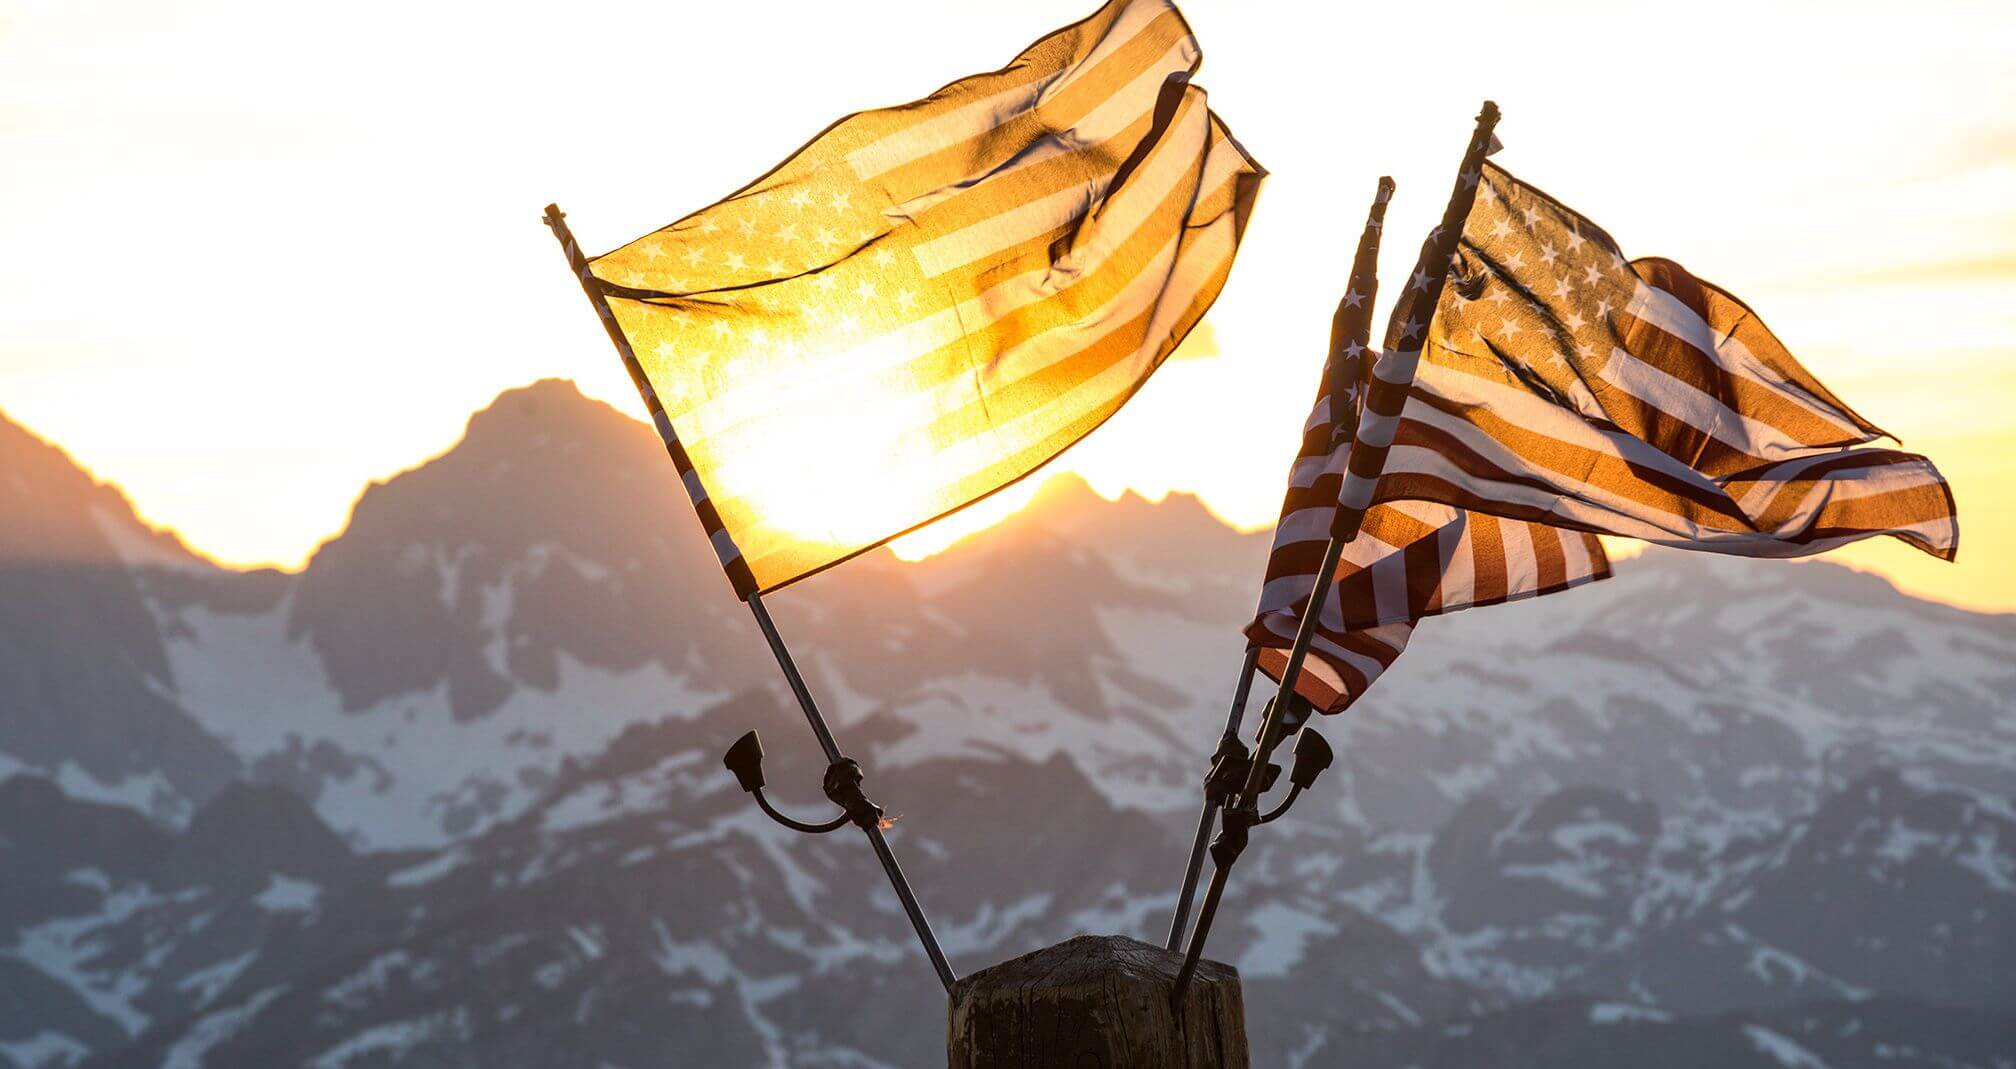 Three American flags flying in the breeze with the sun rising above a mountain range in the background